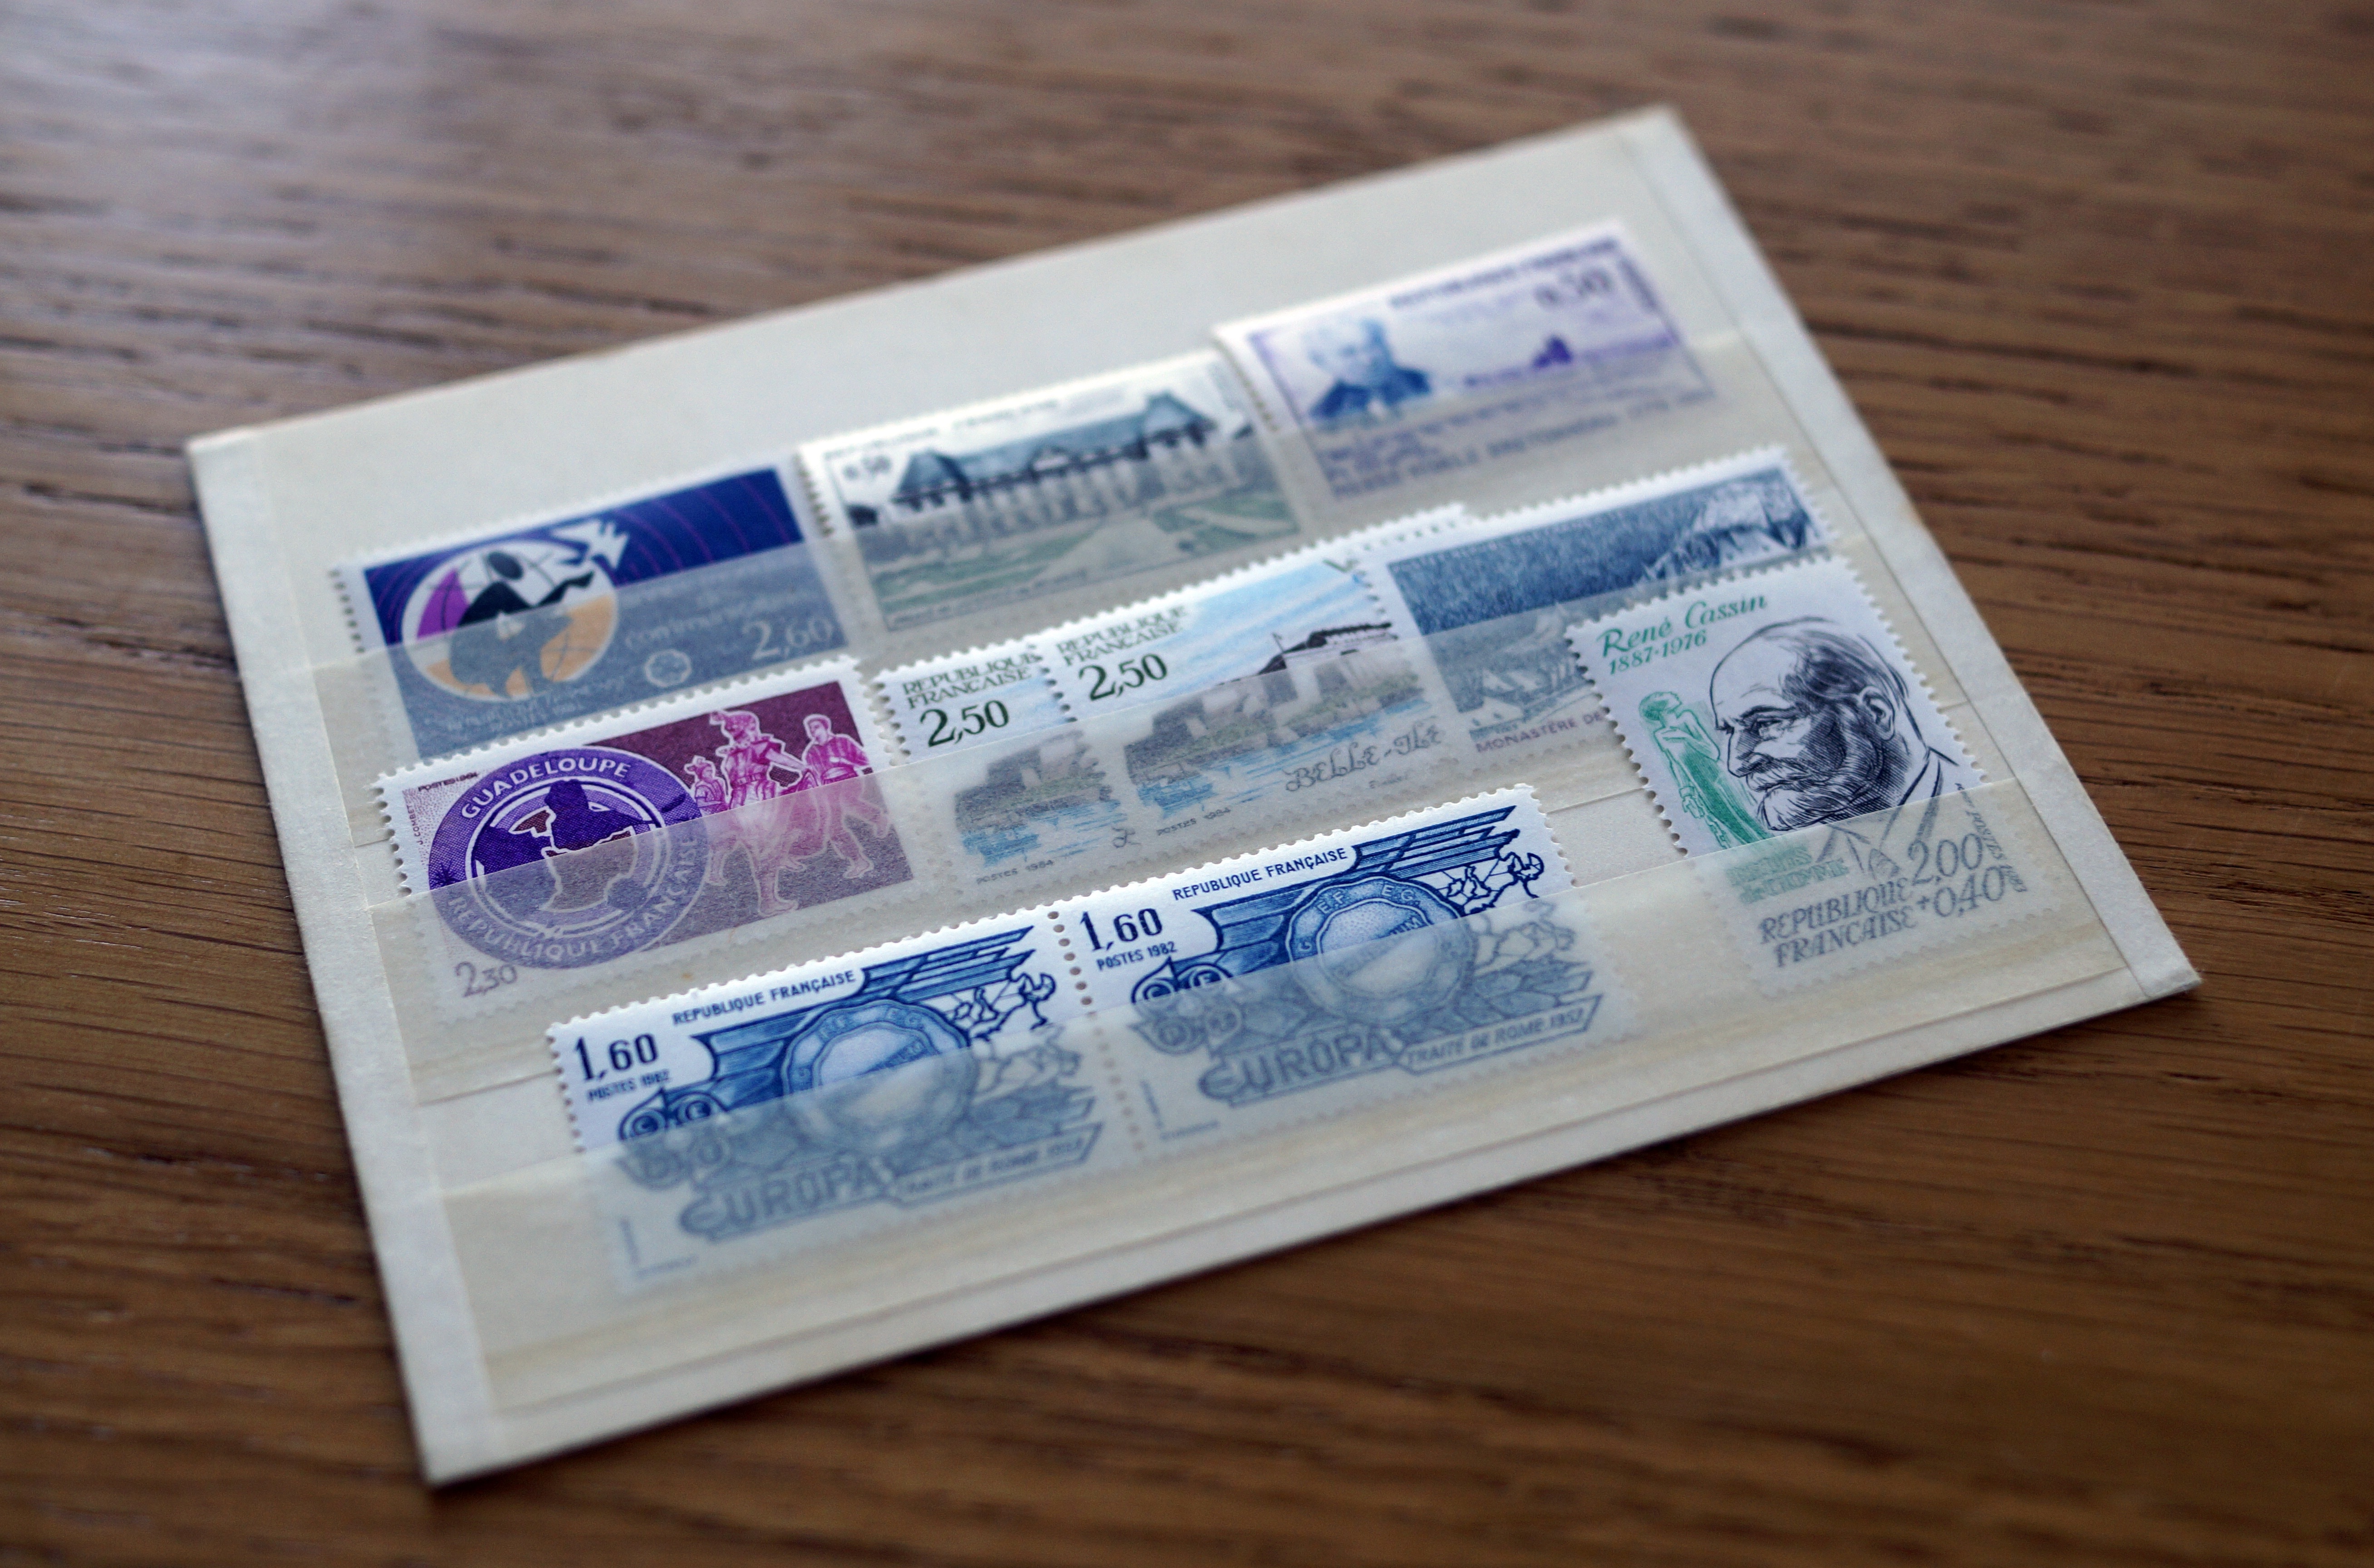 Stamps, Collection, Philately, indoors, paper currency